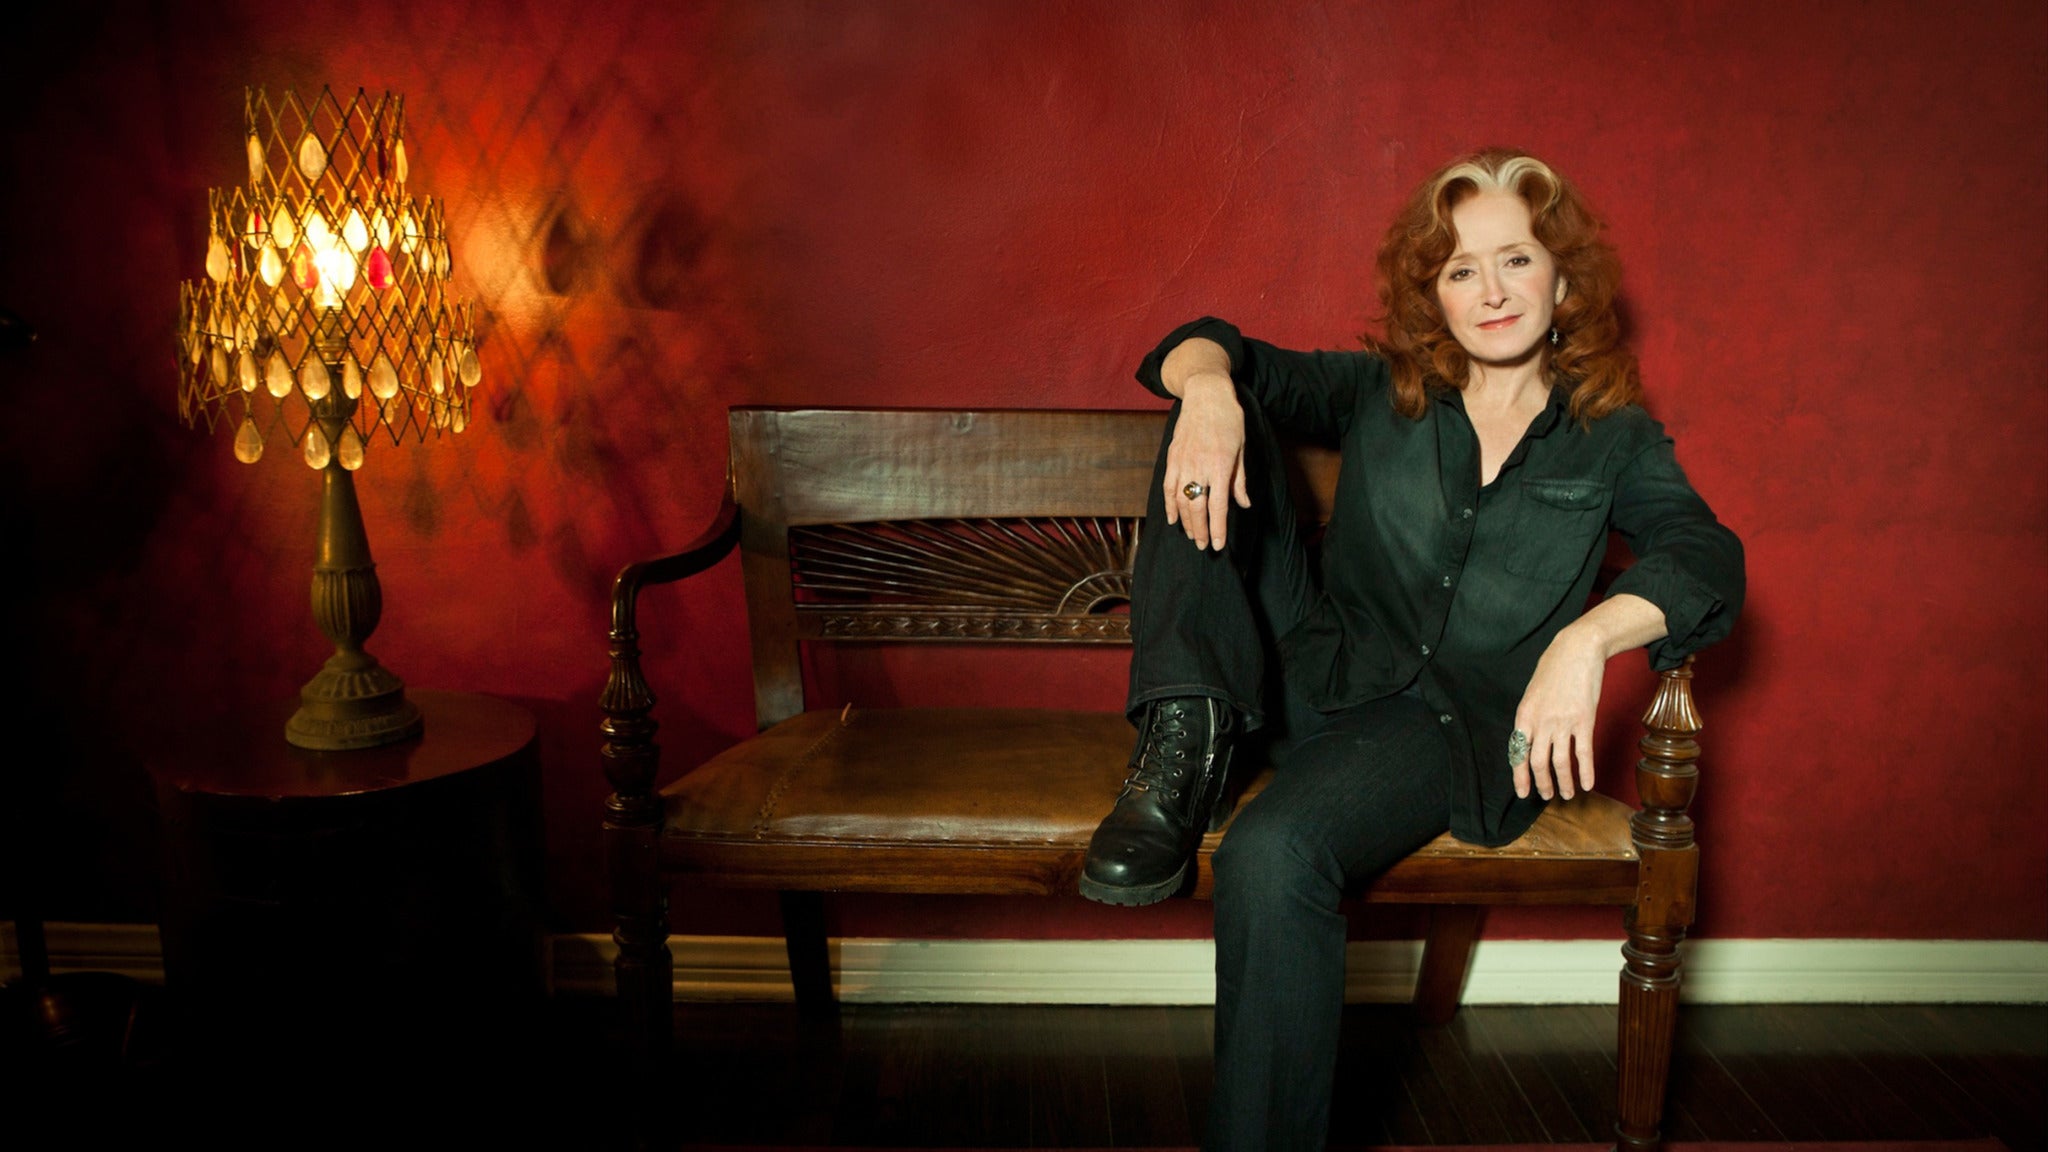 Bonnie Raitt presale password for early tickets in Albany